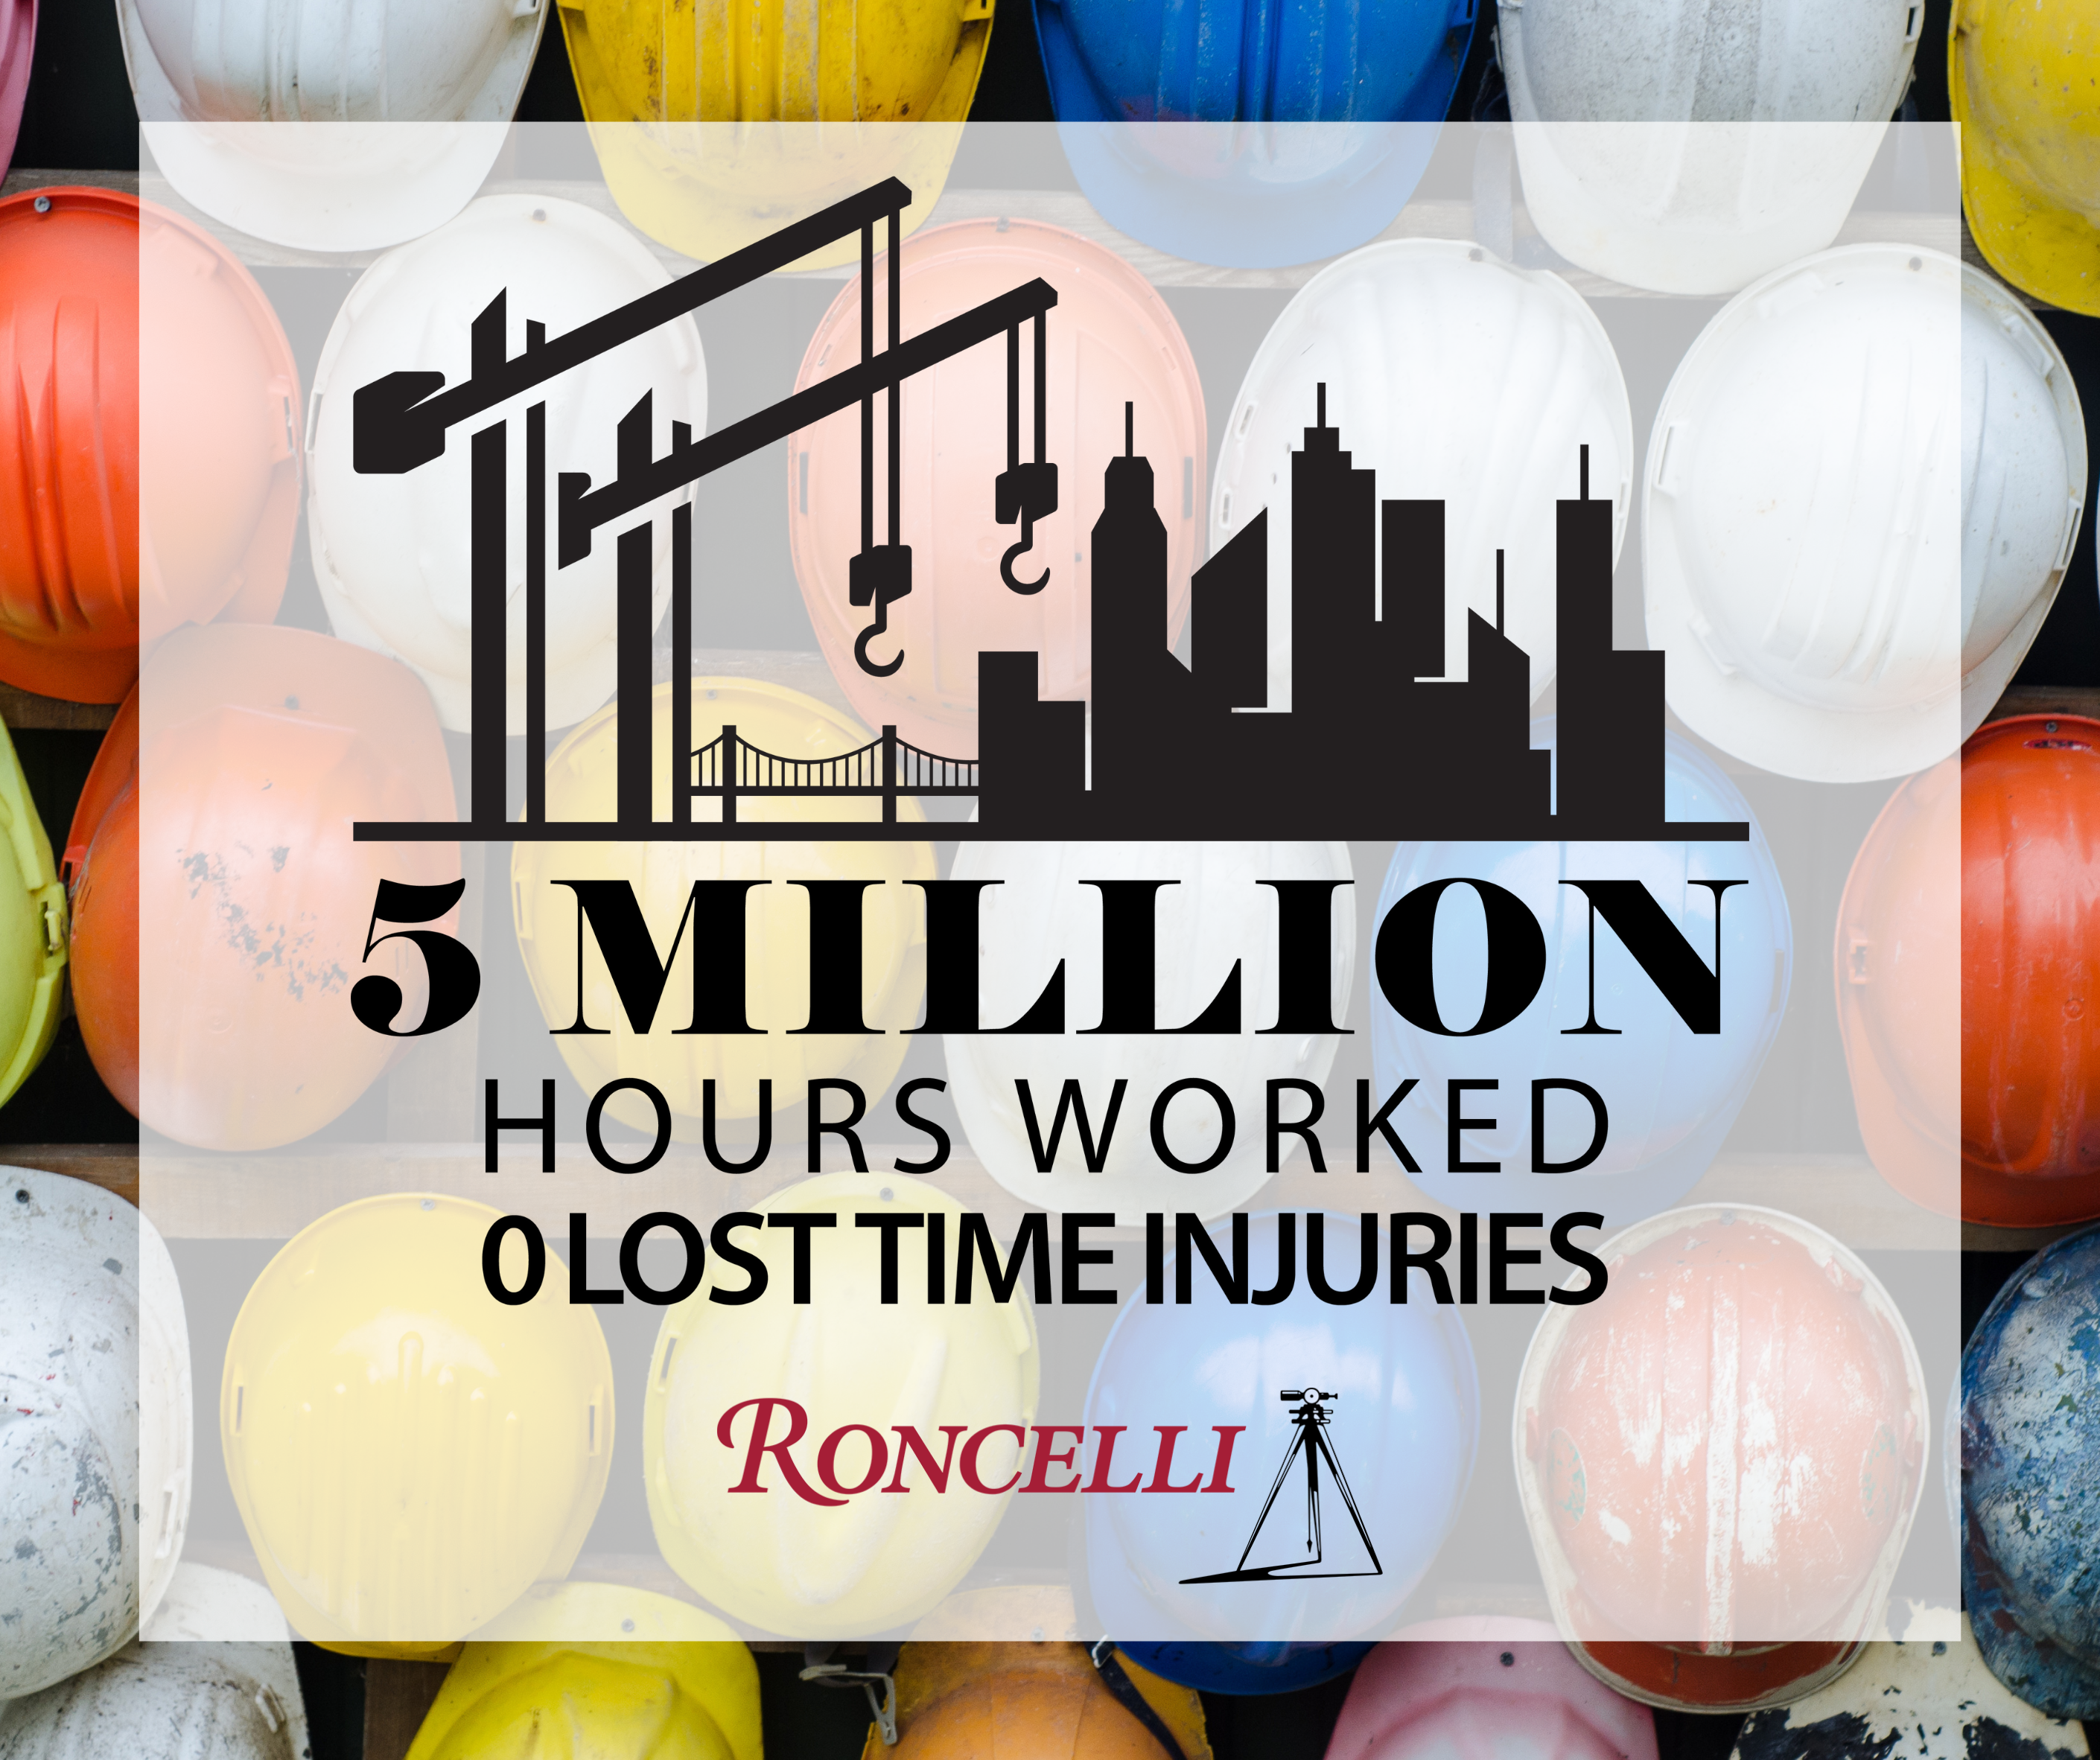 Roncelli Marks 5 Million Man-Hours with Zero Lost Time Injuries